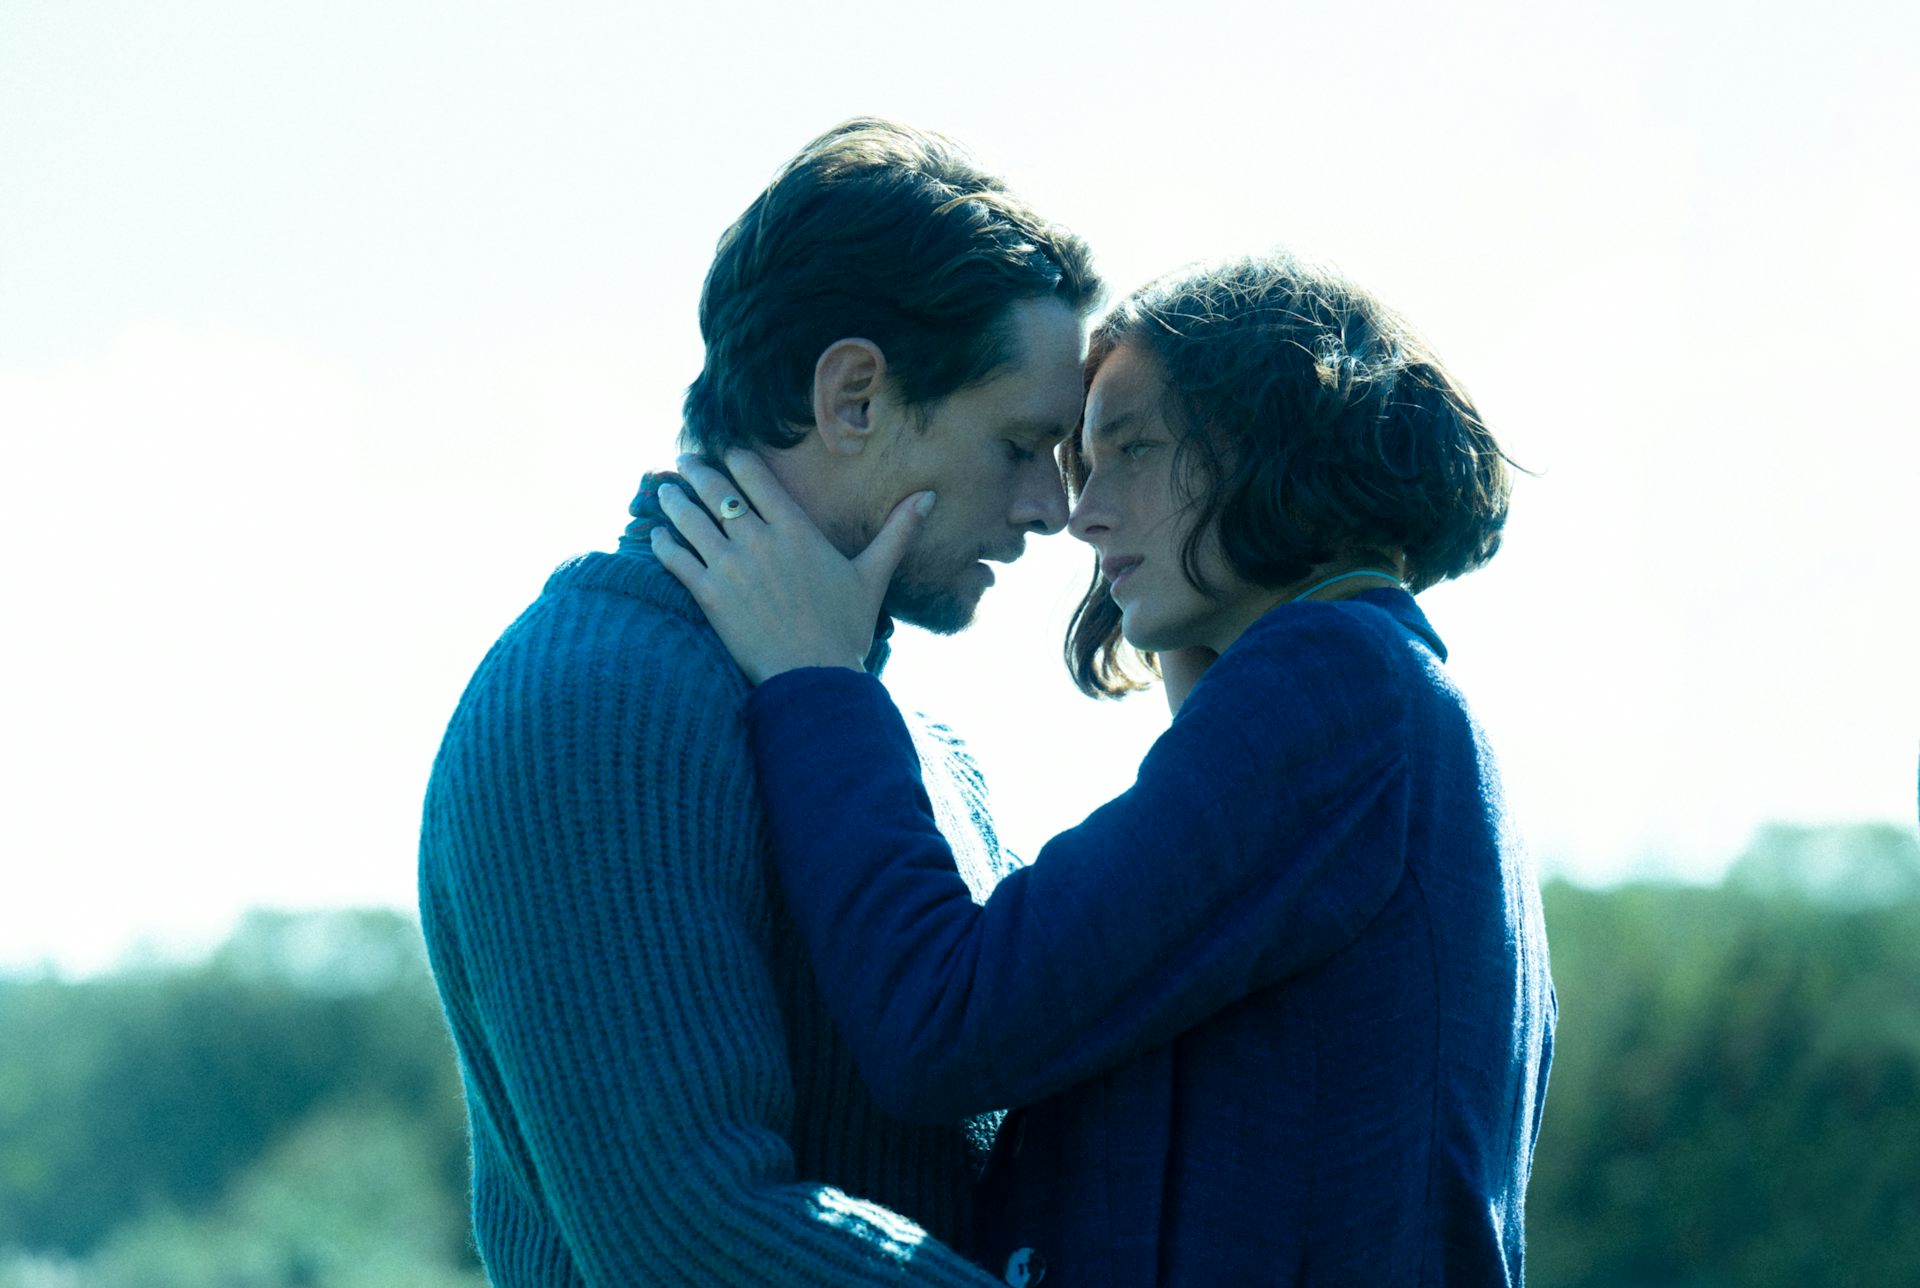 Netflixs Lady Chatterleys Lover reduces this tale of class conflict to a simple love story pic